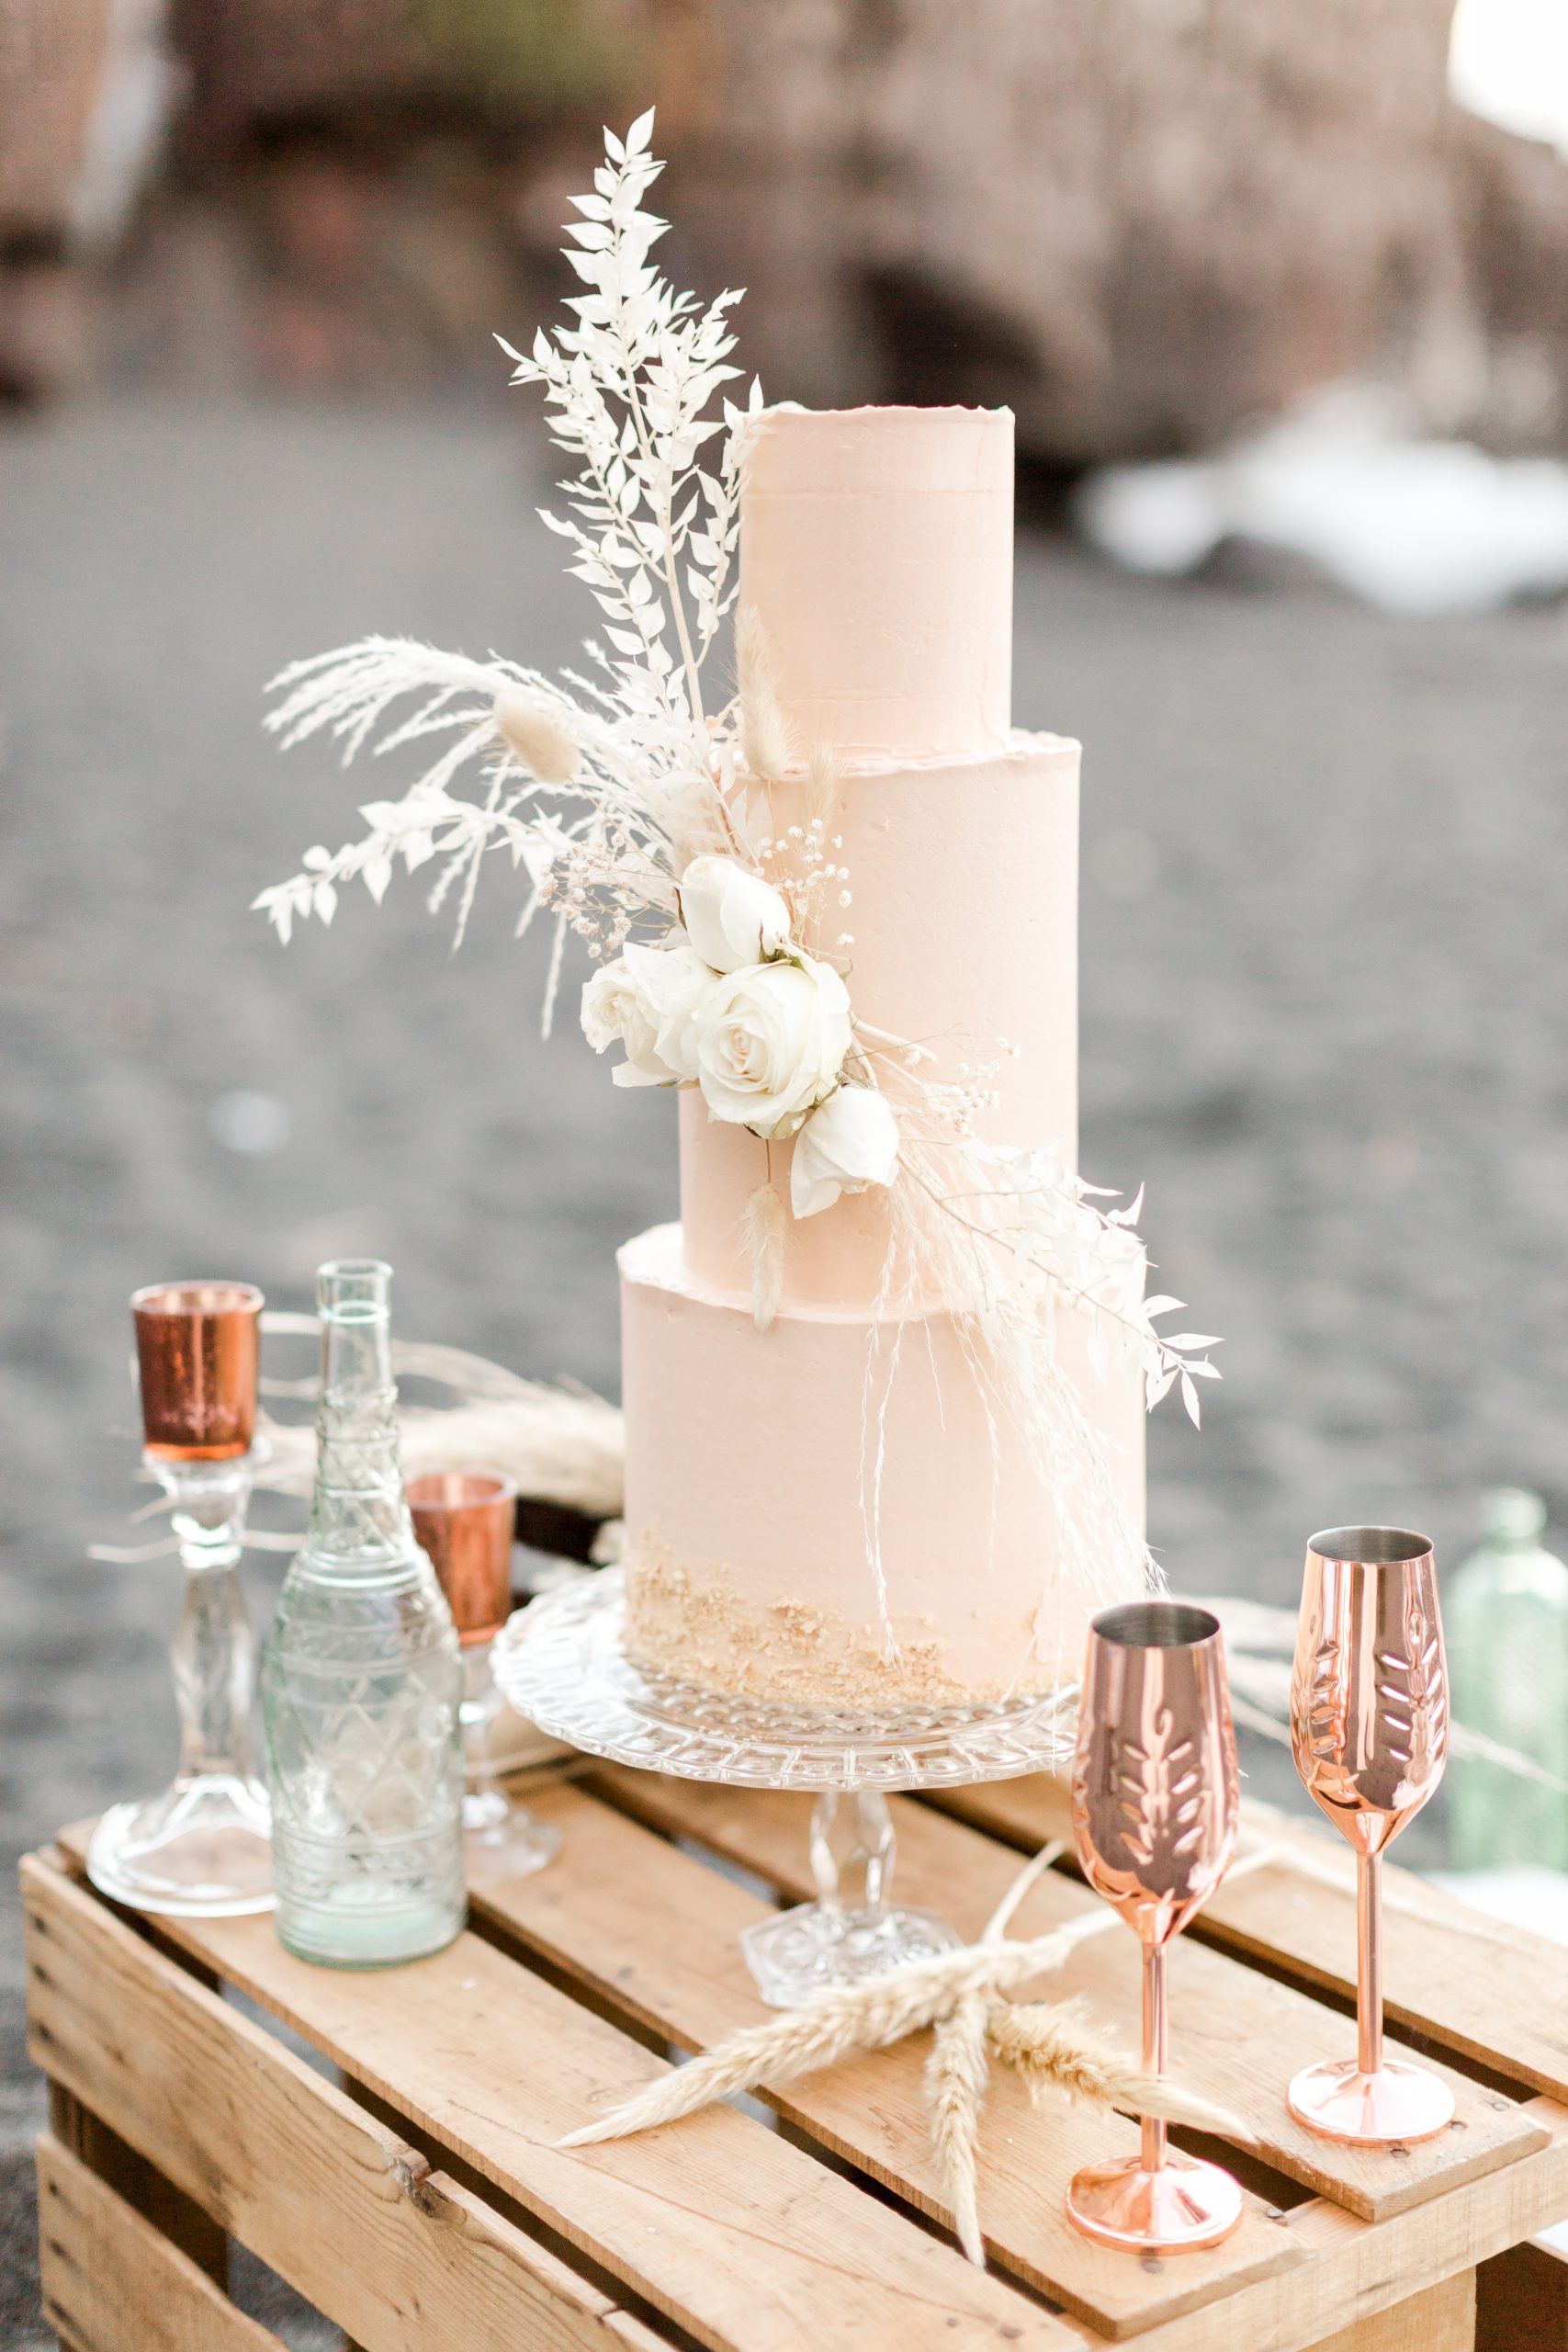 Sand-inspired Beach Wedding Cake with Wave-like Texture